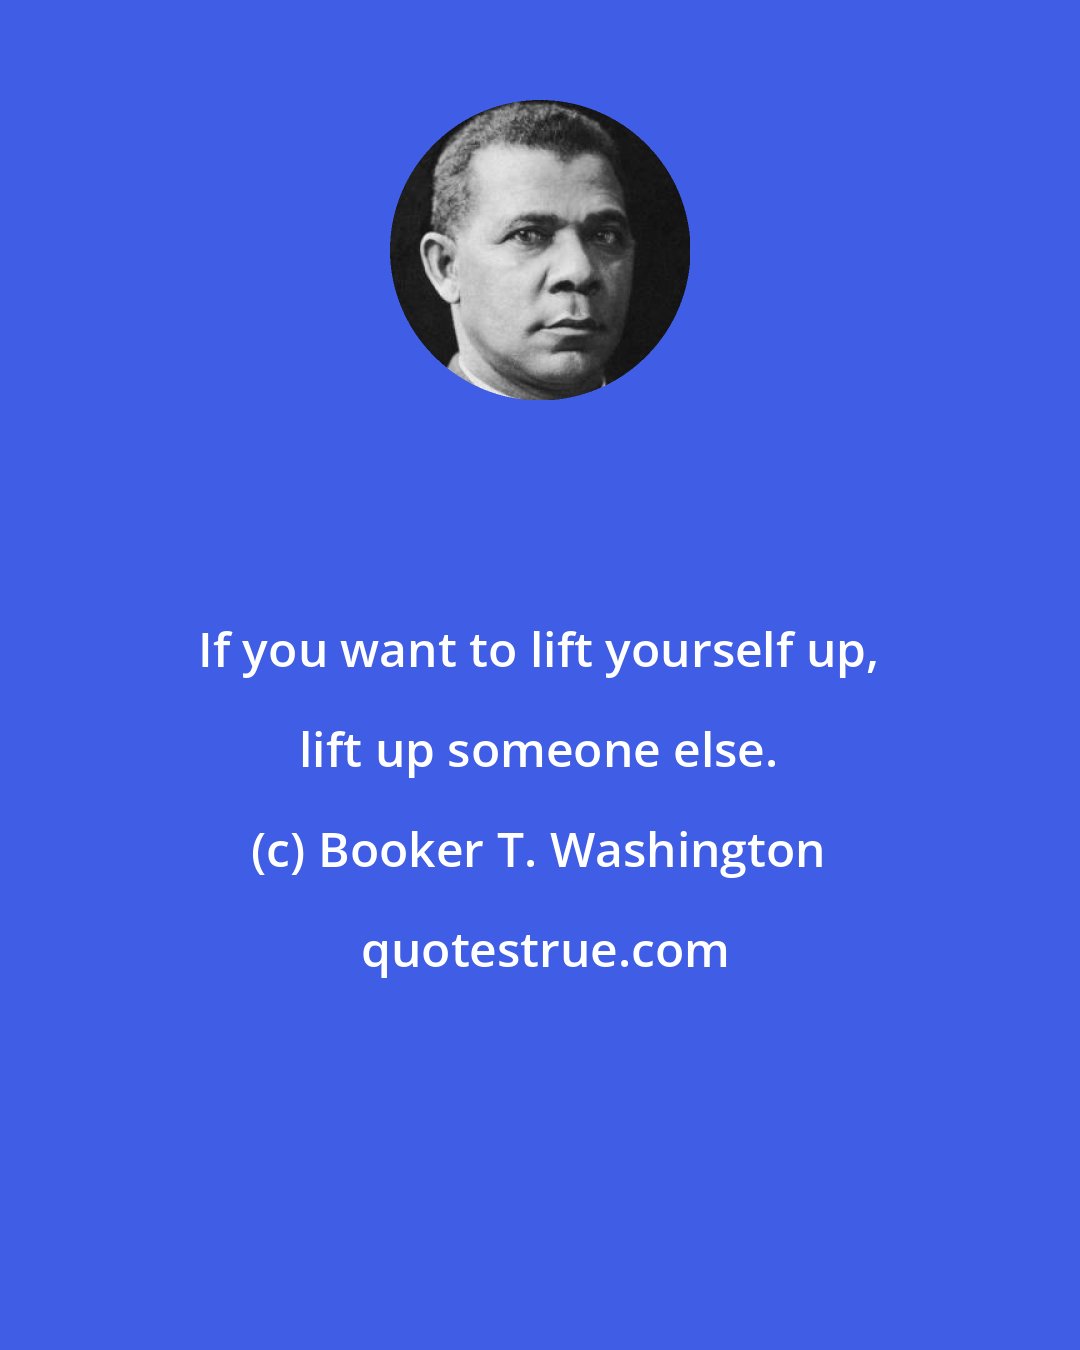 Booker T. Washington: If you want to lift yourself up, lift up someone else.